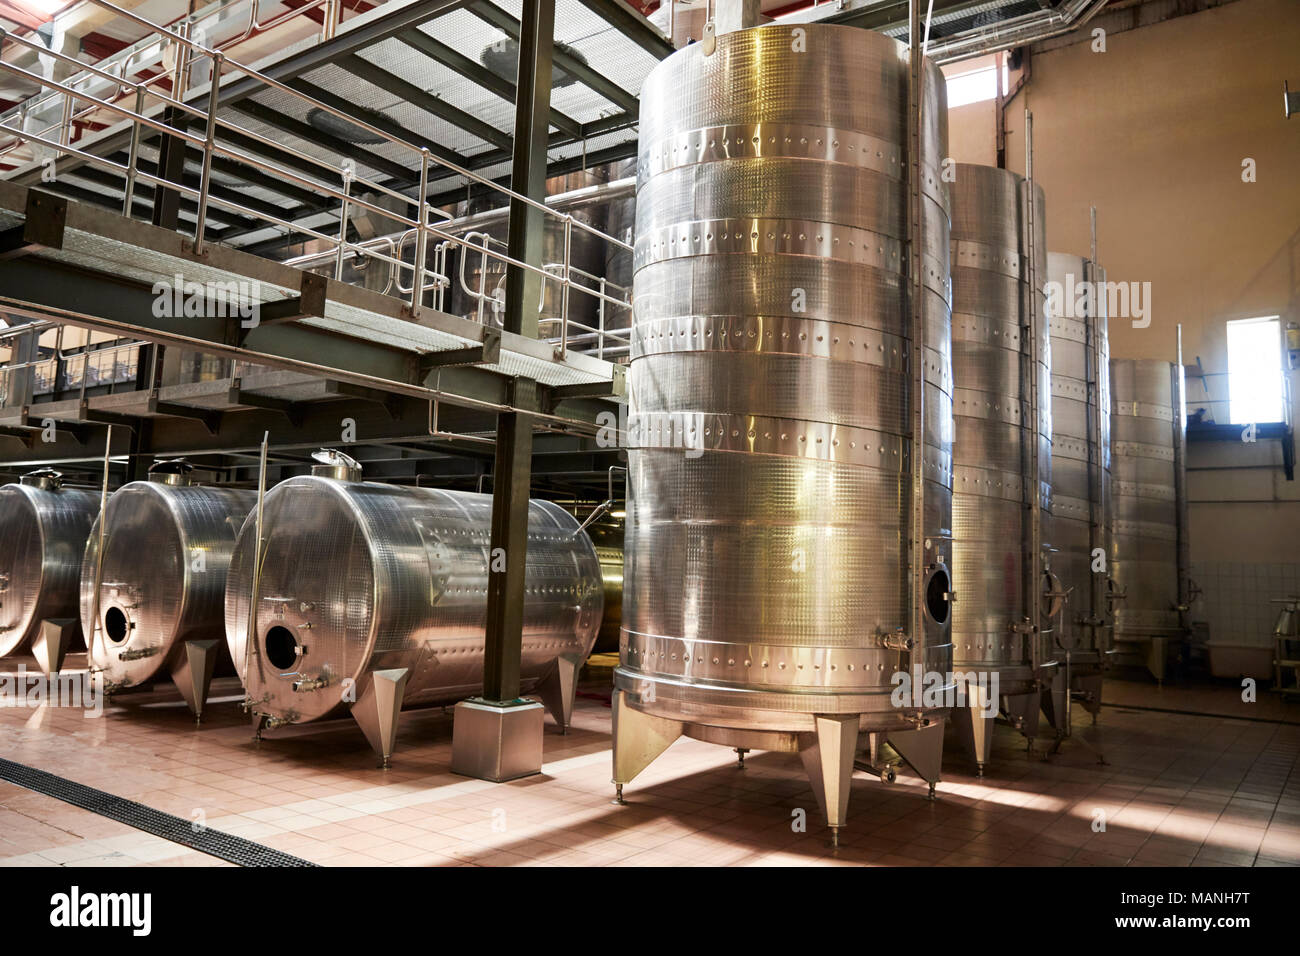 Metal winemaking equipment in a modern winemaking facility Stock Photo